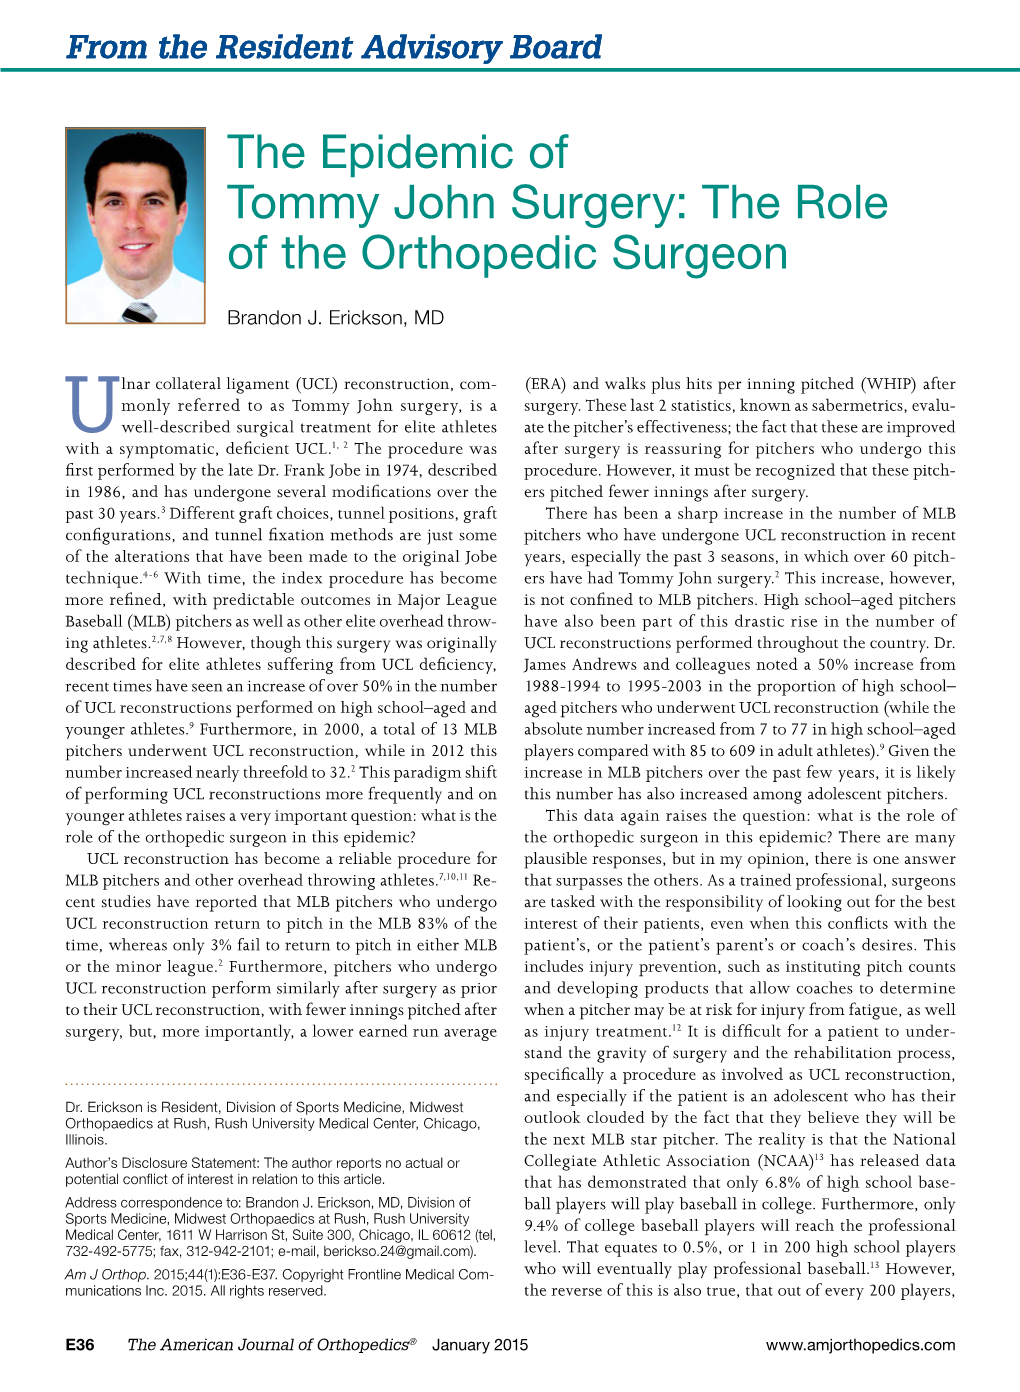 The Epidemic of Tommy John Surgery: the Role of the Orthopedic Surgeon